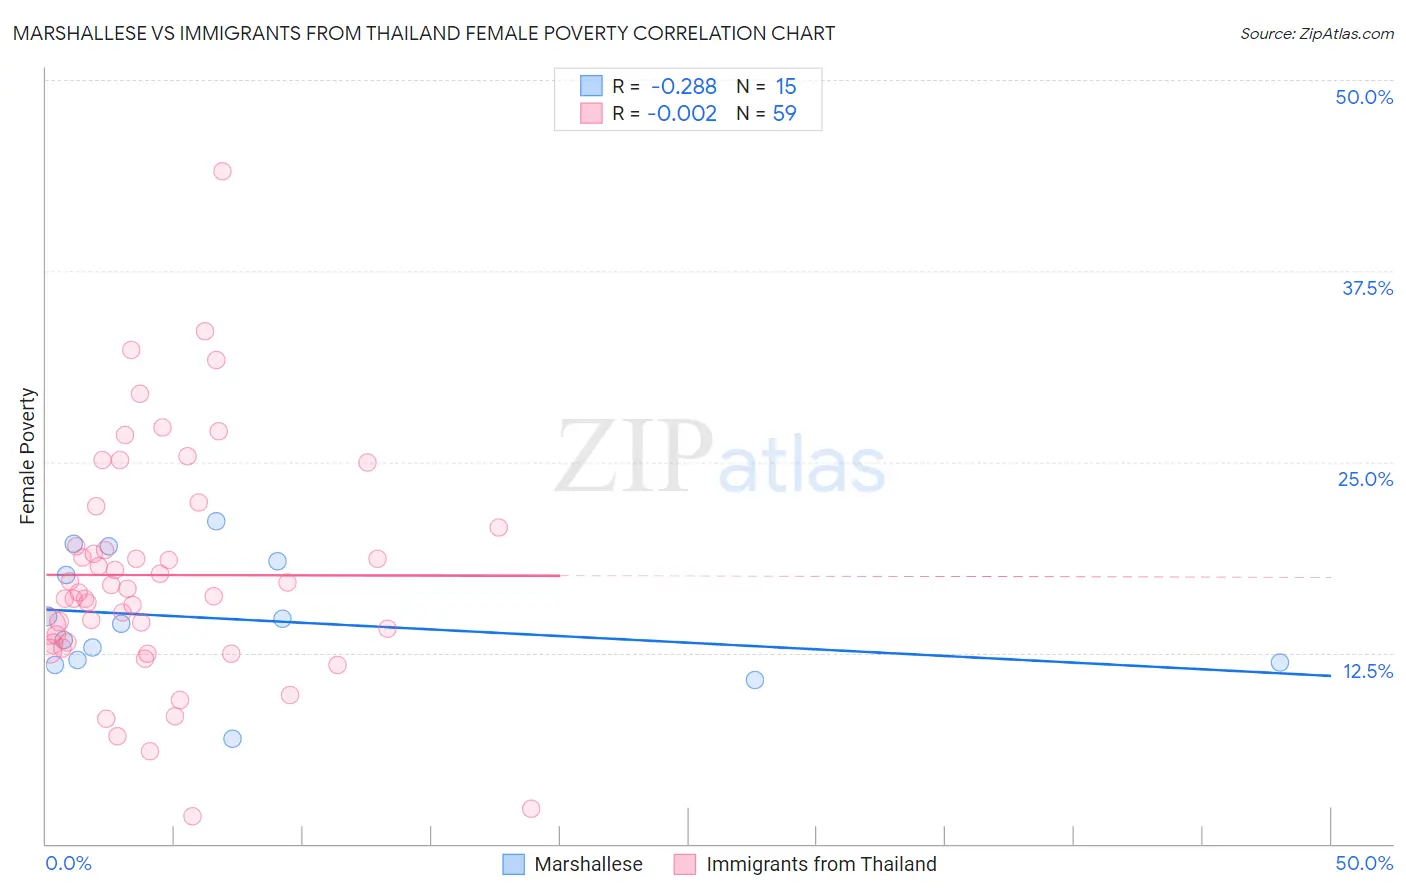 Marshallese vs Immigrants from Thailand Female Poverty